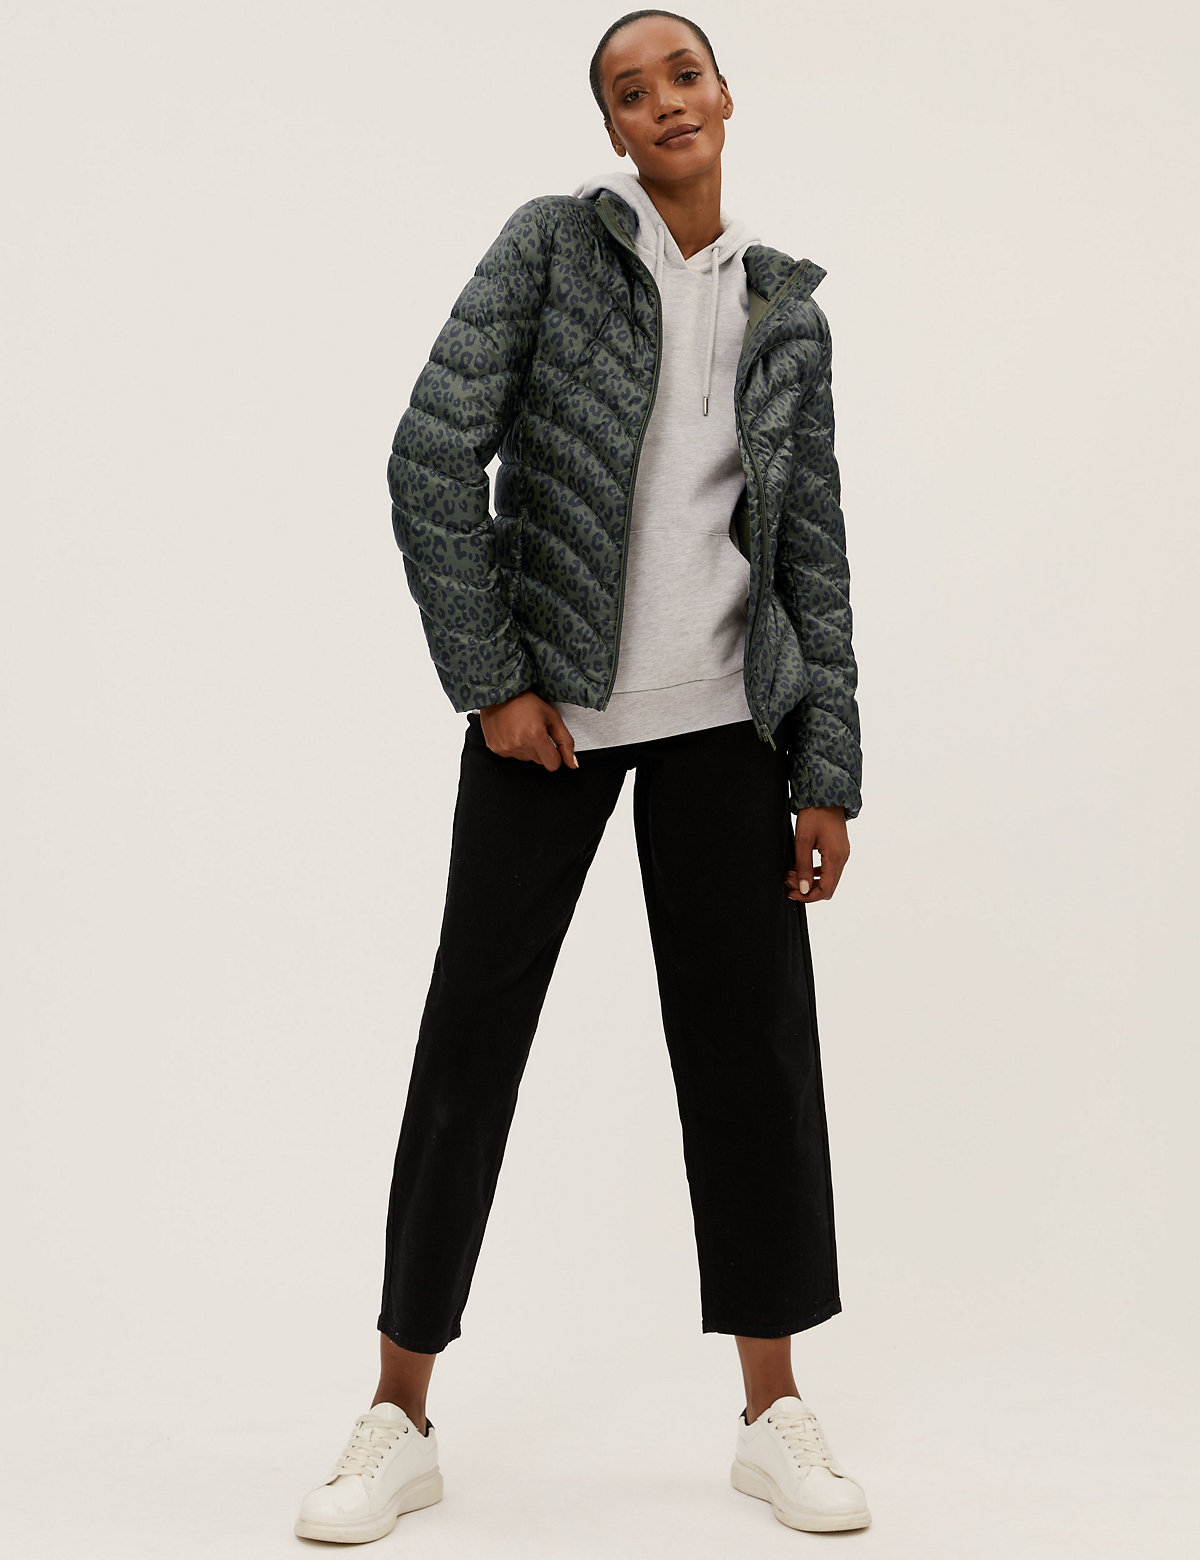 Feather & Down Animal Print Puffer Jacket